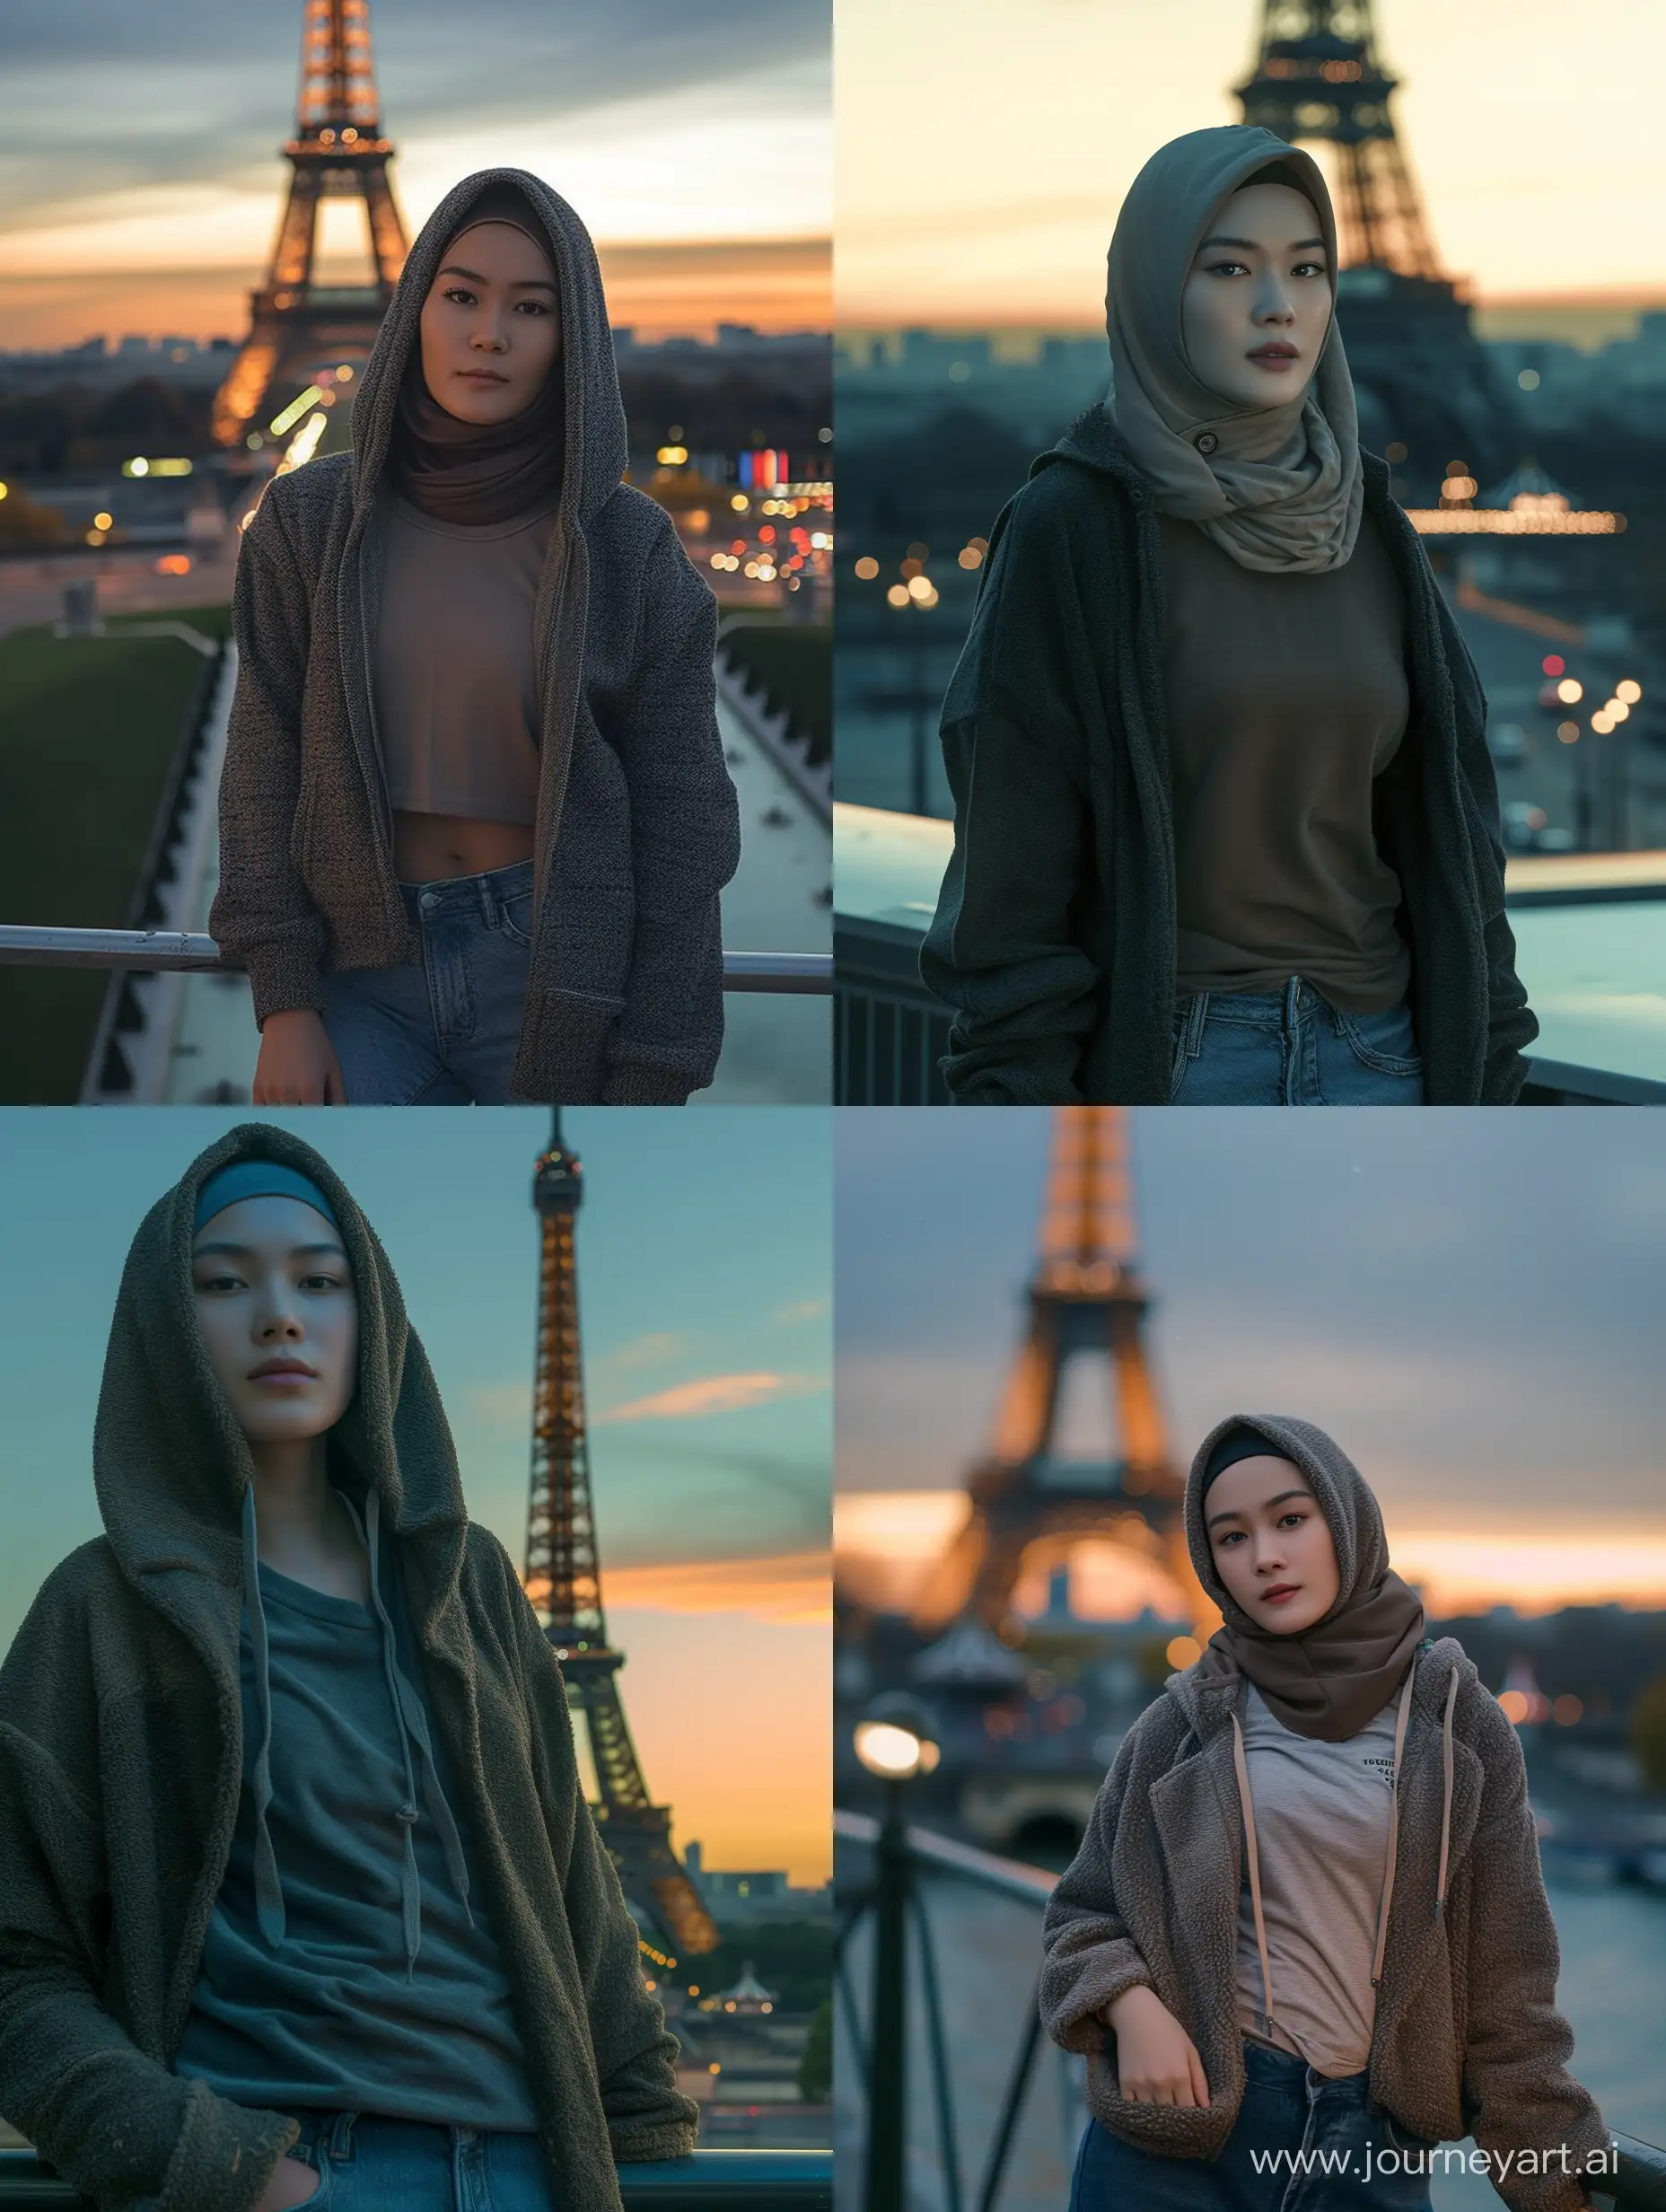 Javanese-Woman-in-Hijab-Posing-at-Night-with-Eiffel-Tower-Background